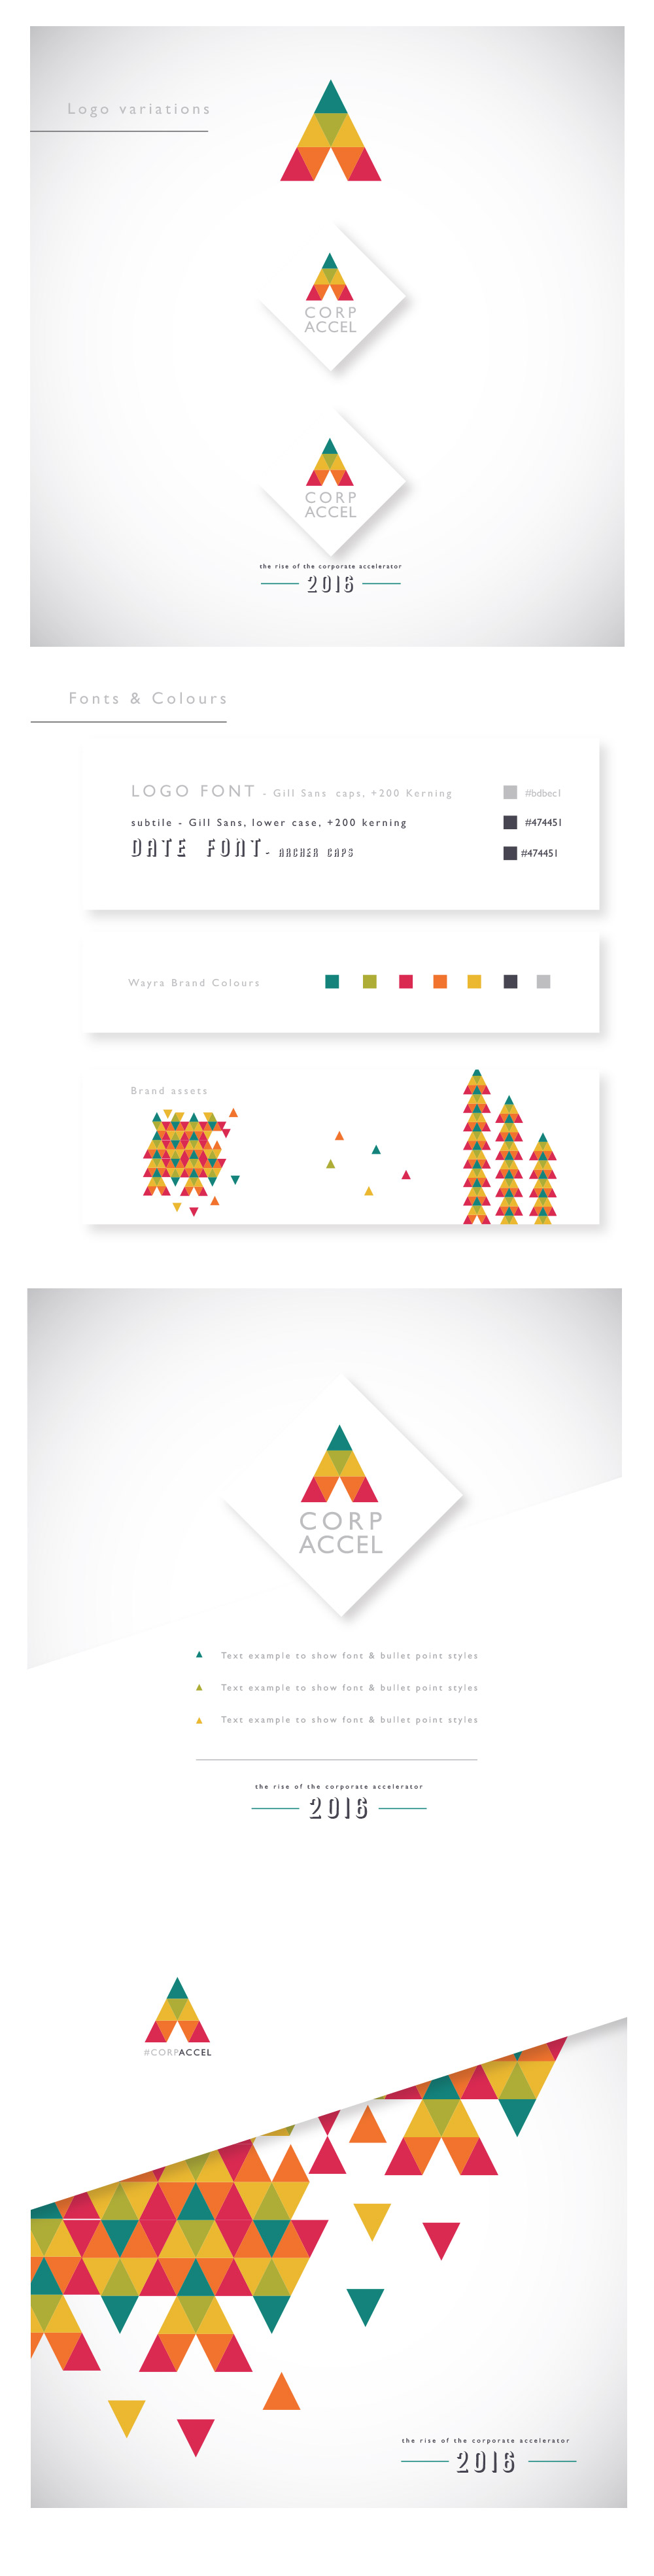 Branding-for-an-event-by-Wayra